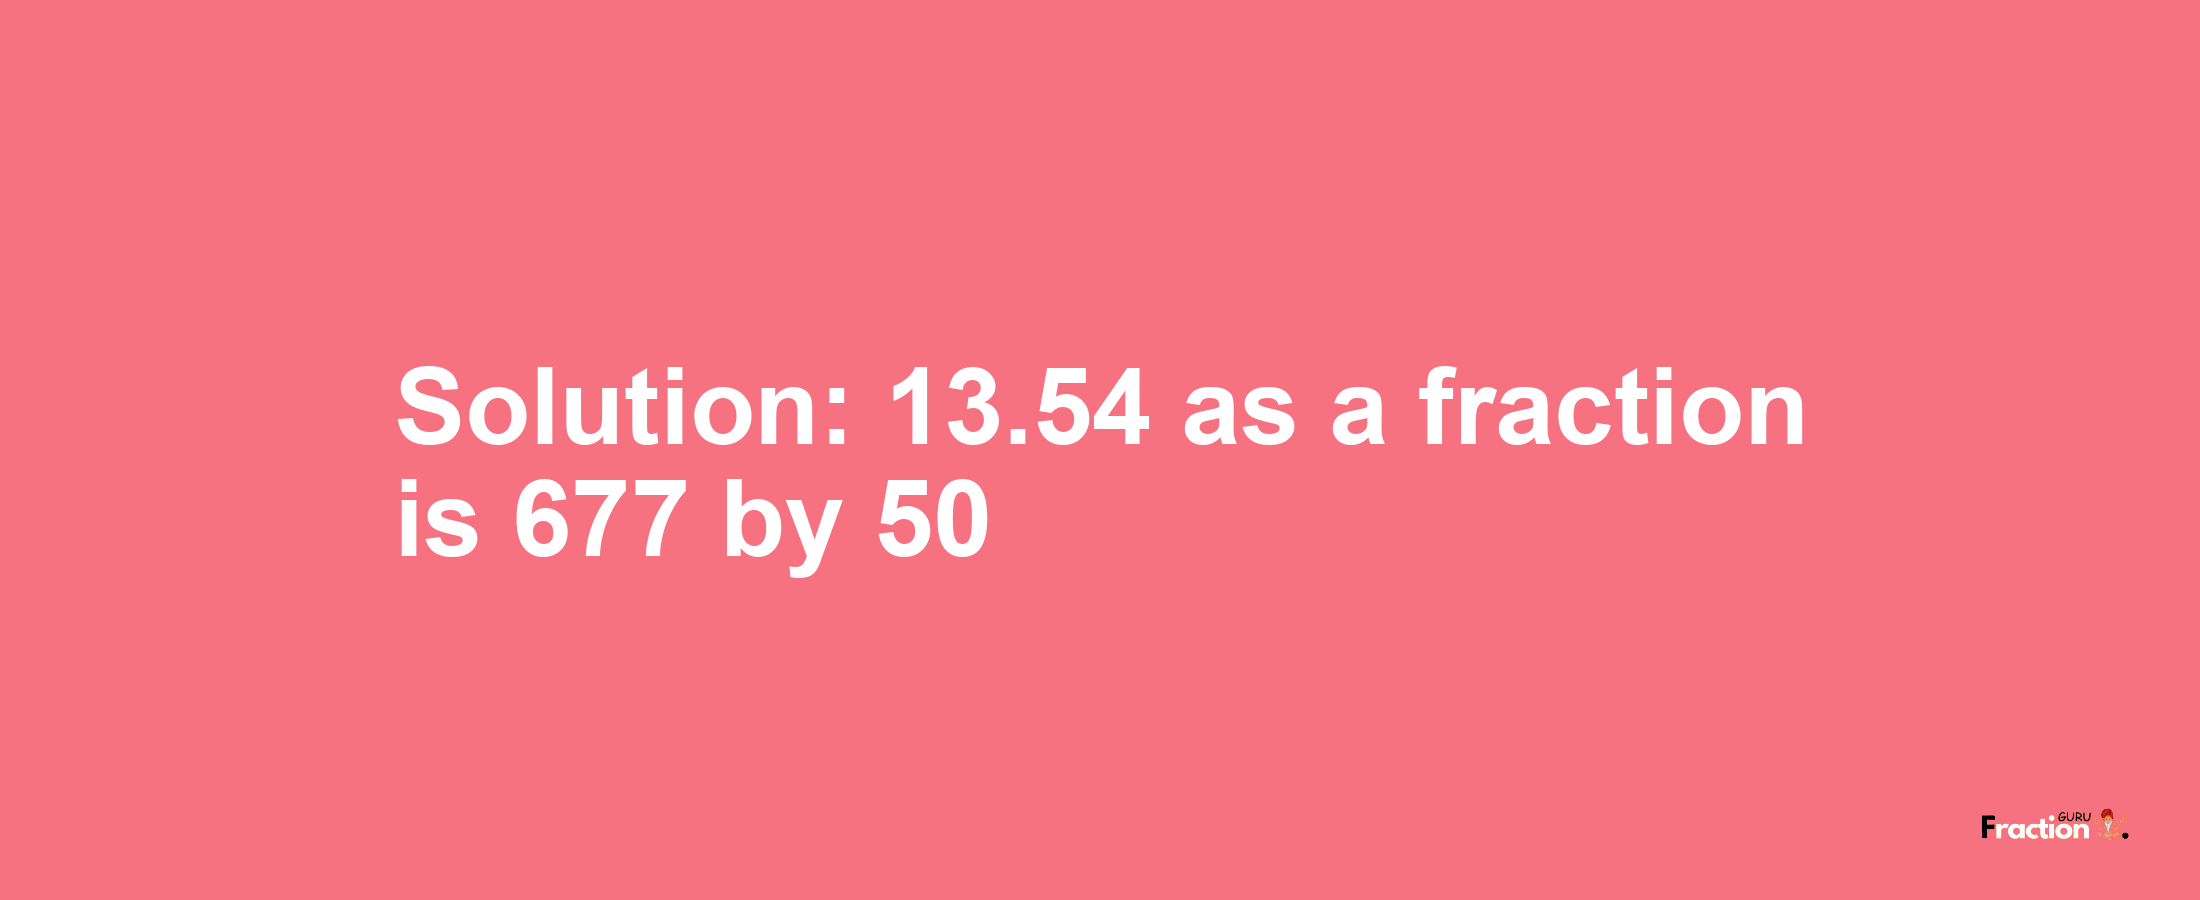 Solution:13.54 as a fraction is 677/50